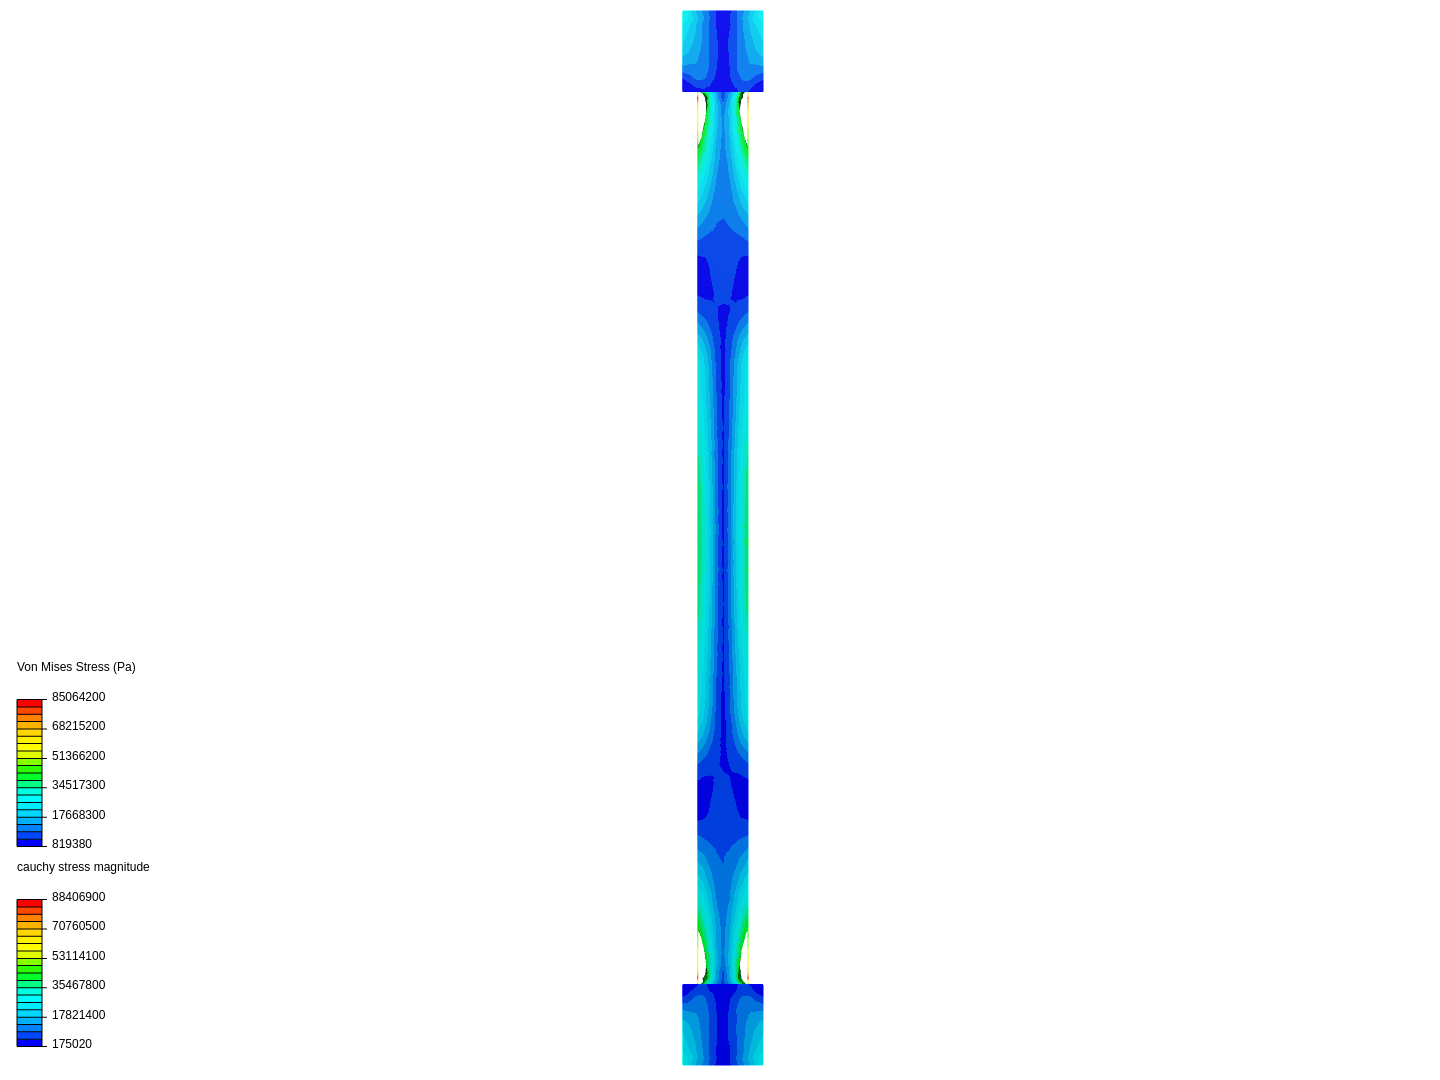 fea stairs image